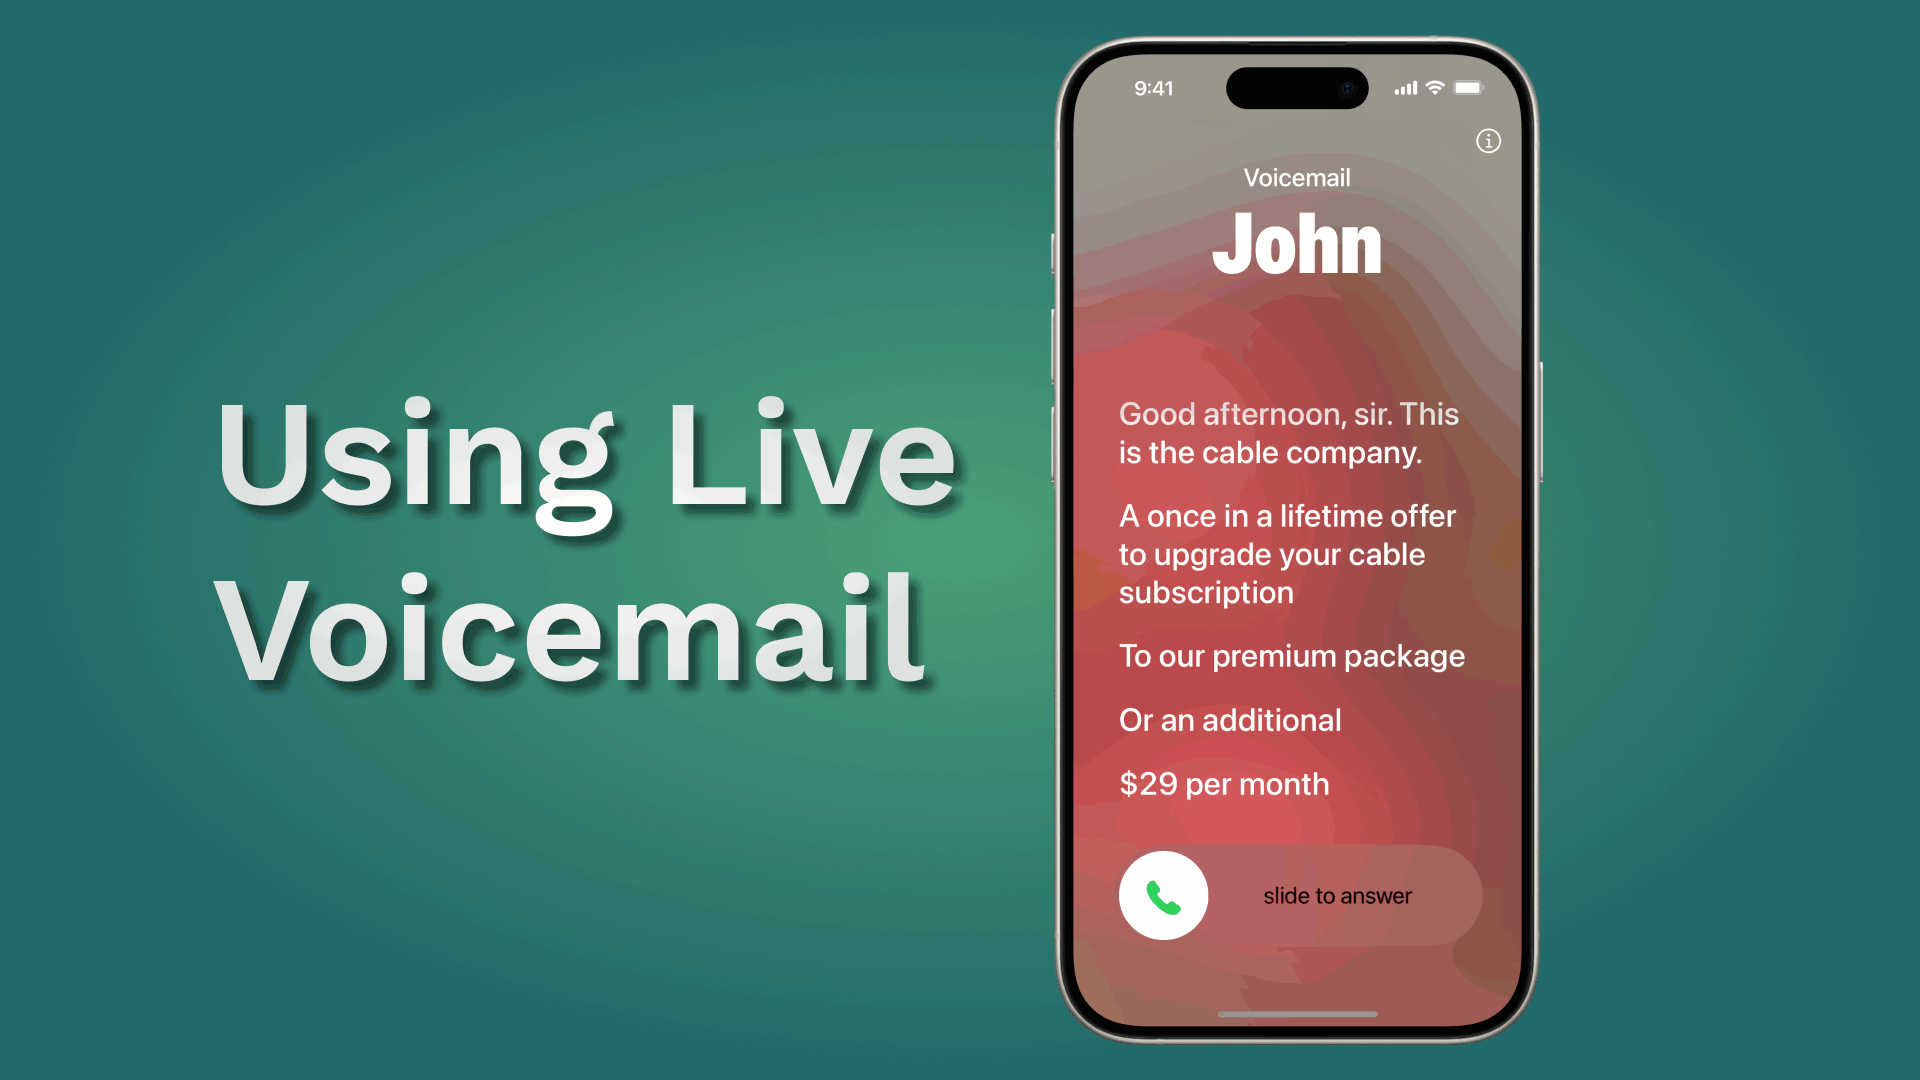 looping animation showing an incoming phone call and the live transcription in a voicemail